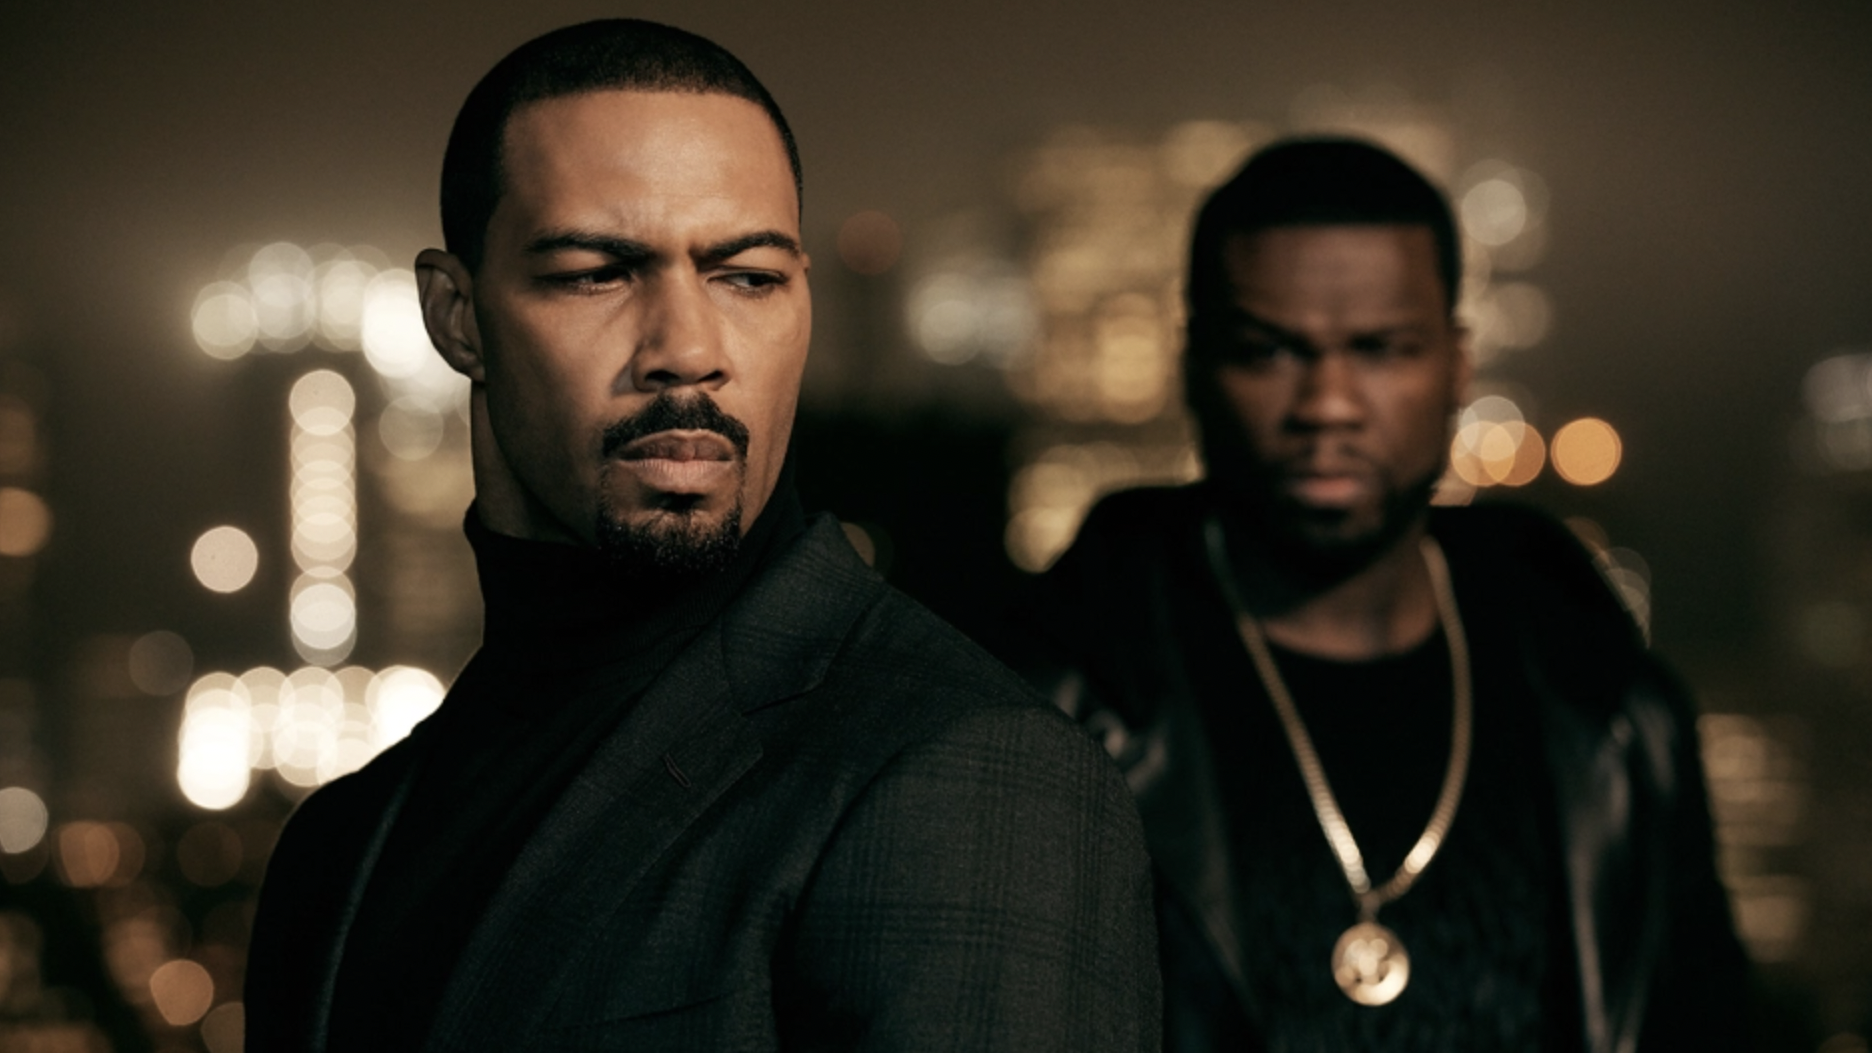 The Cast of “Power” (Starz): Where Are These Black Actors Now?